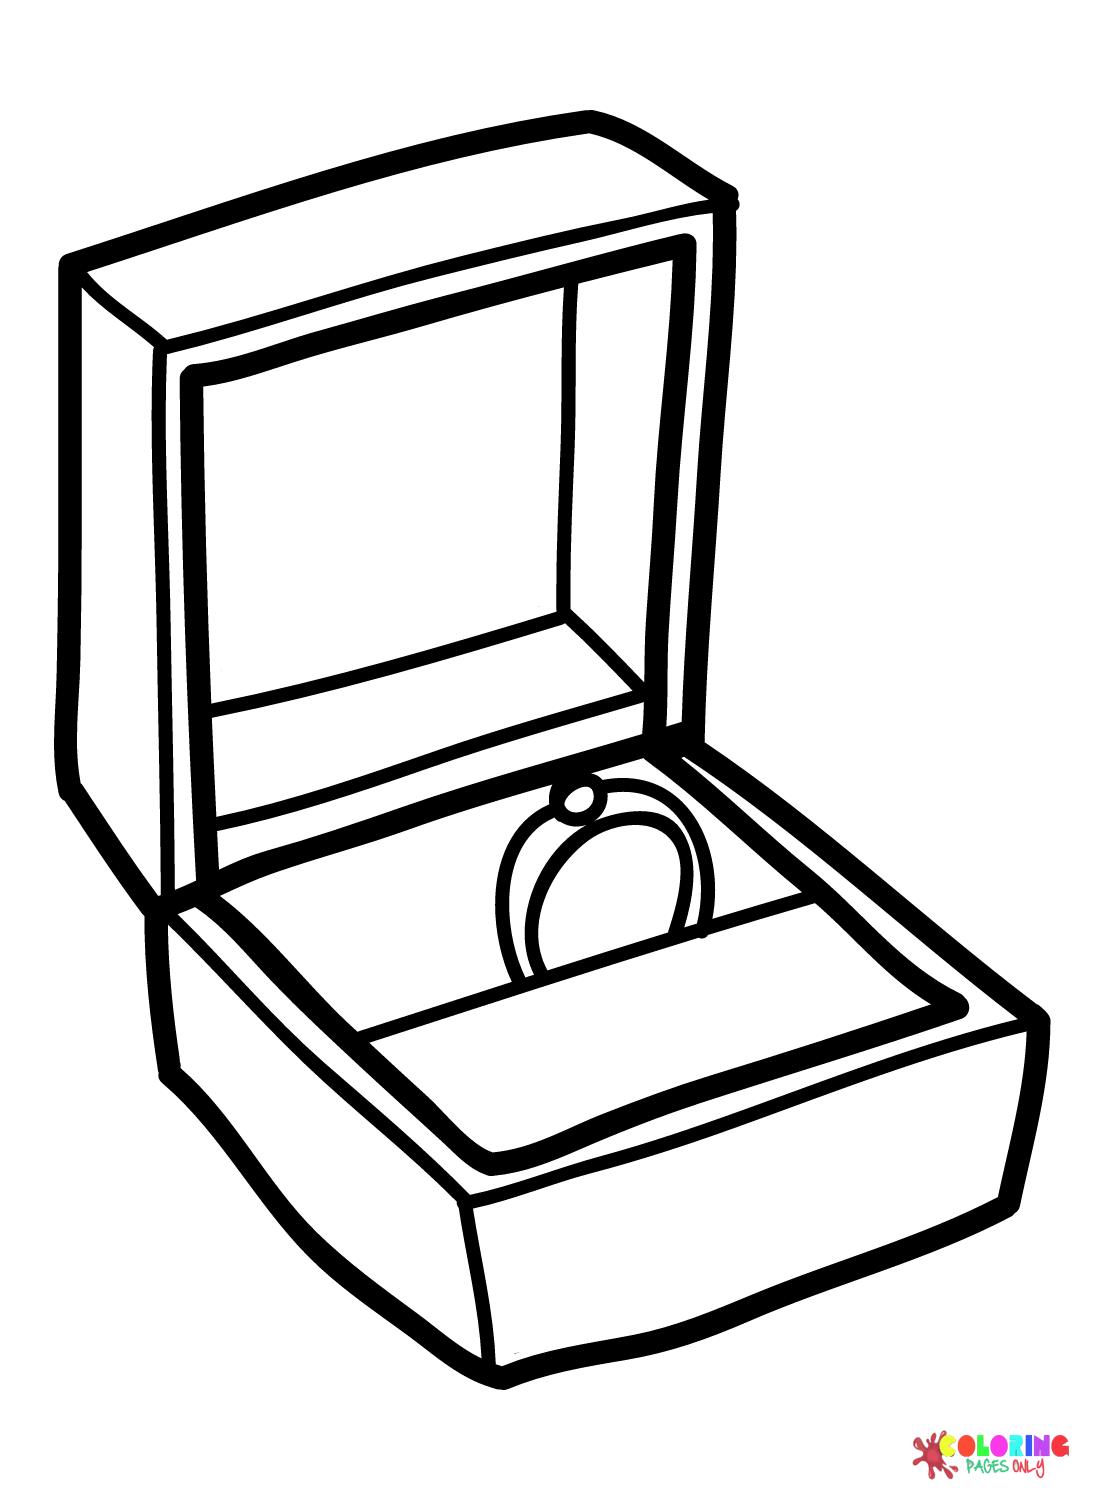 Wedding Ring with Box from Wedding Ring